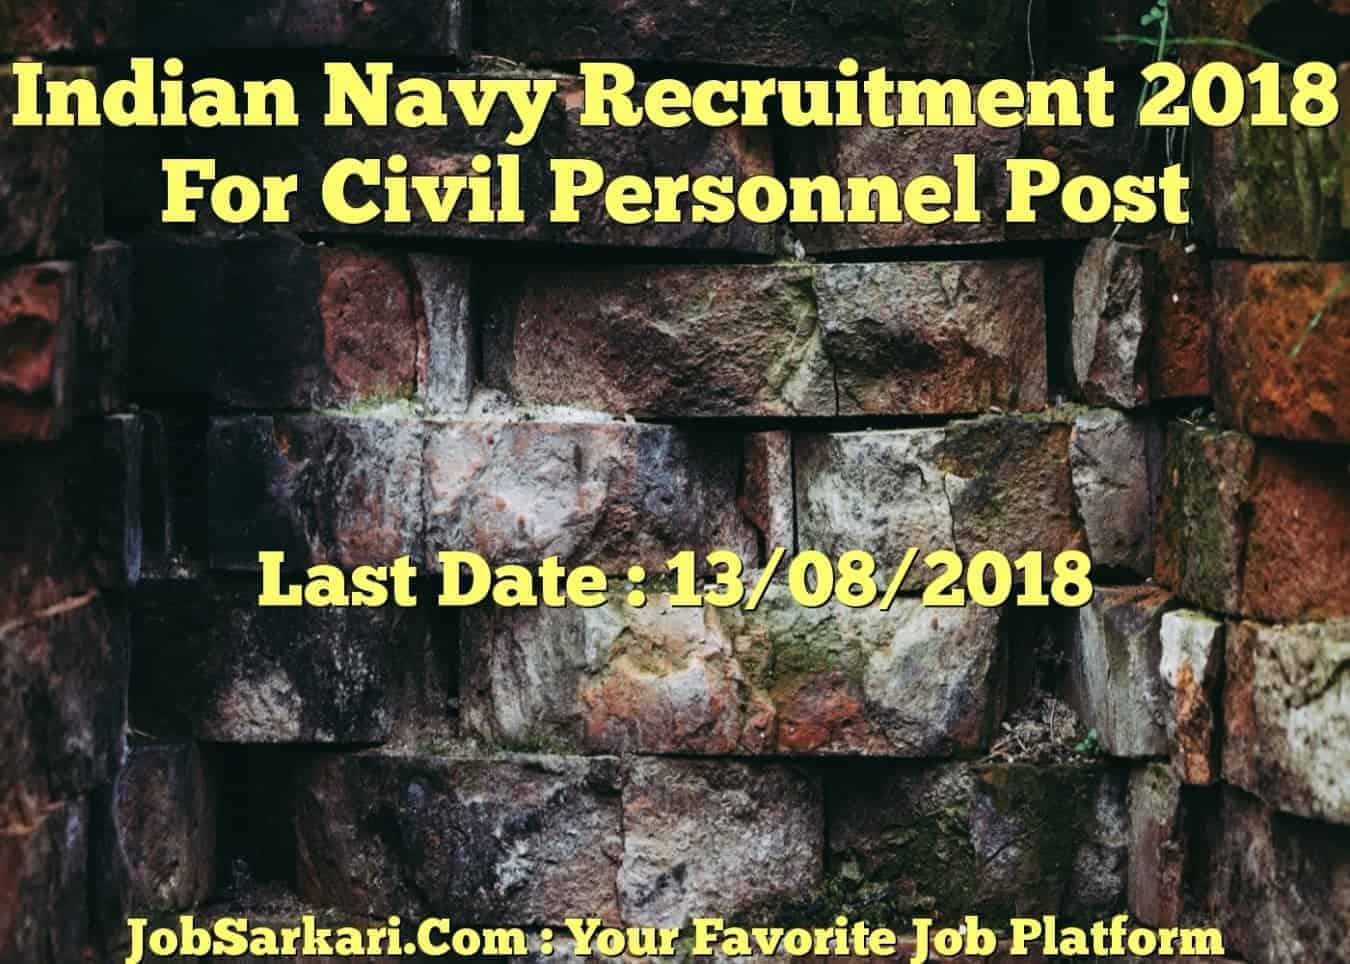 Indian Navy Recruitment 2018 For Civil Personnel Post (For Ex-Navel Apprentices)